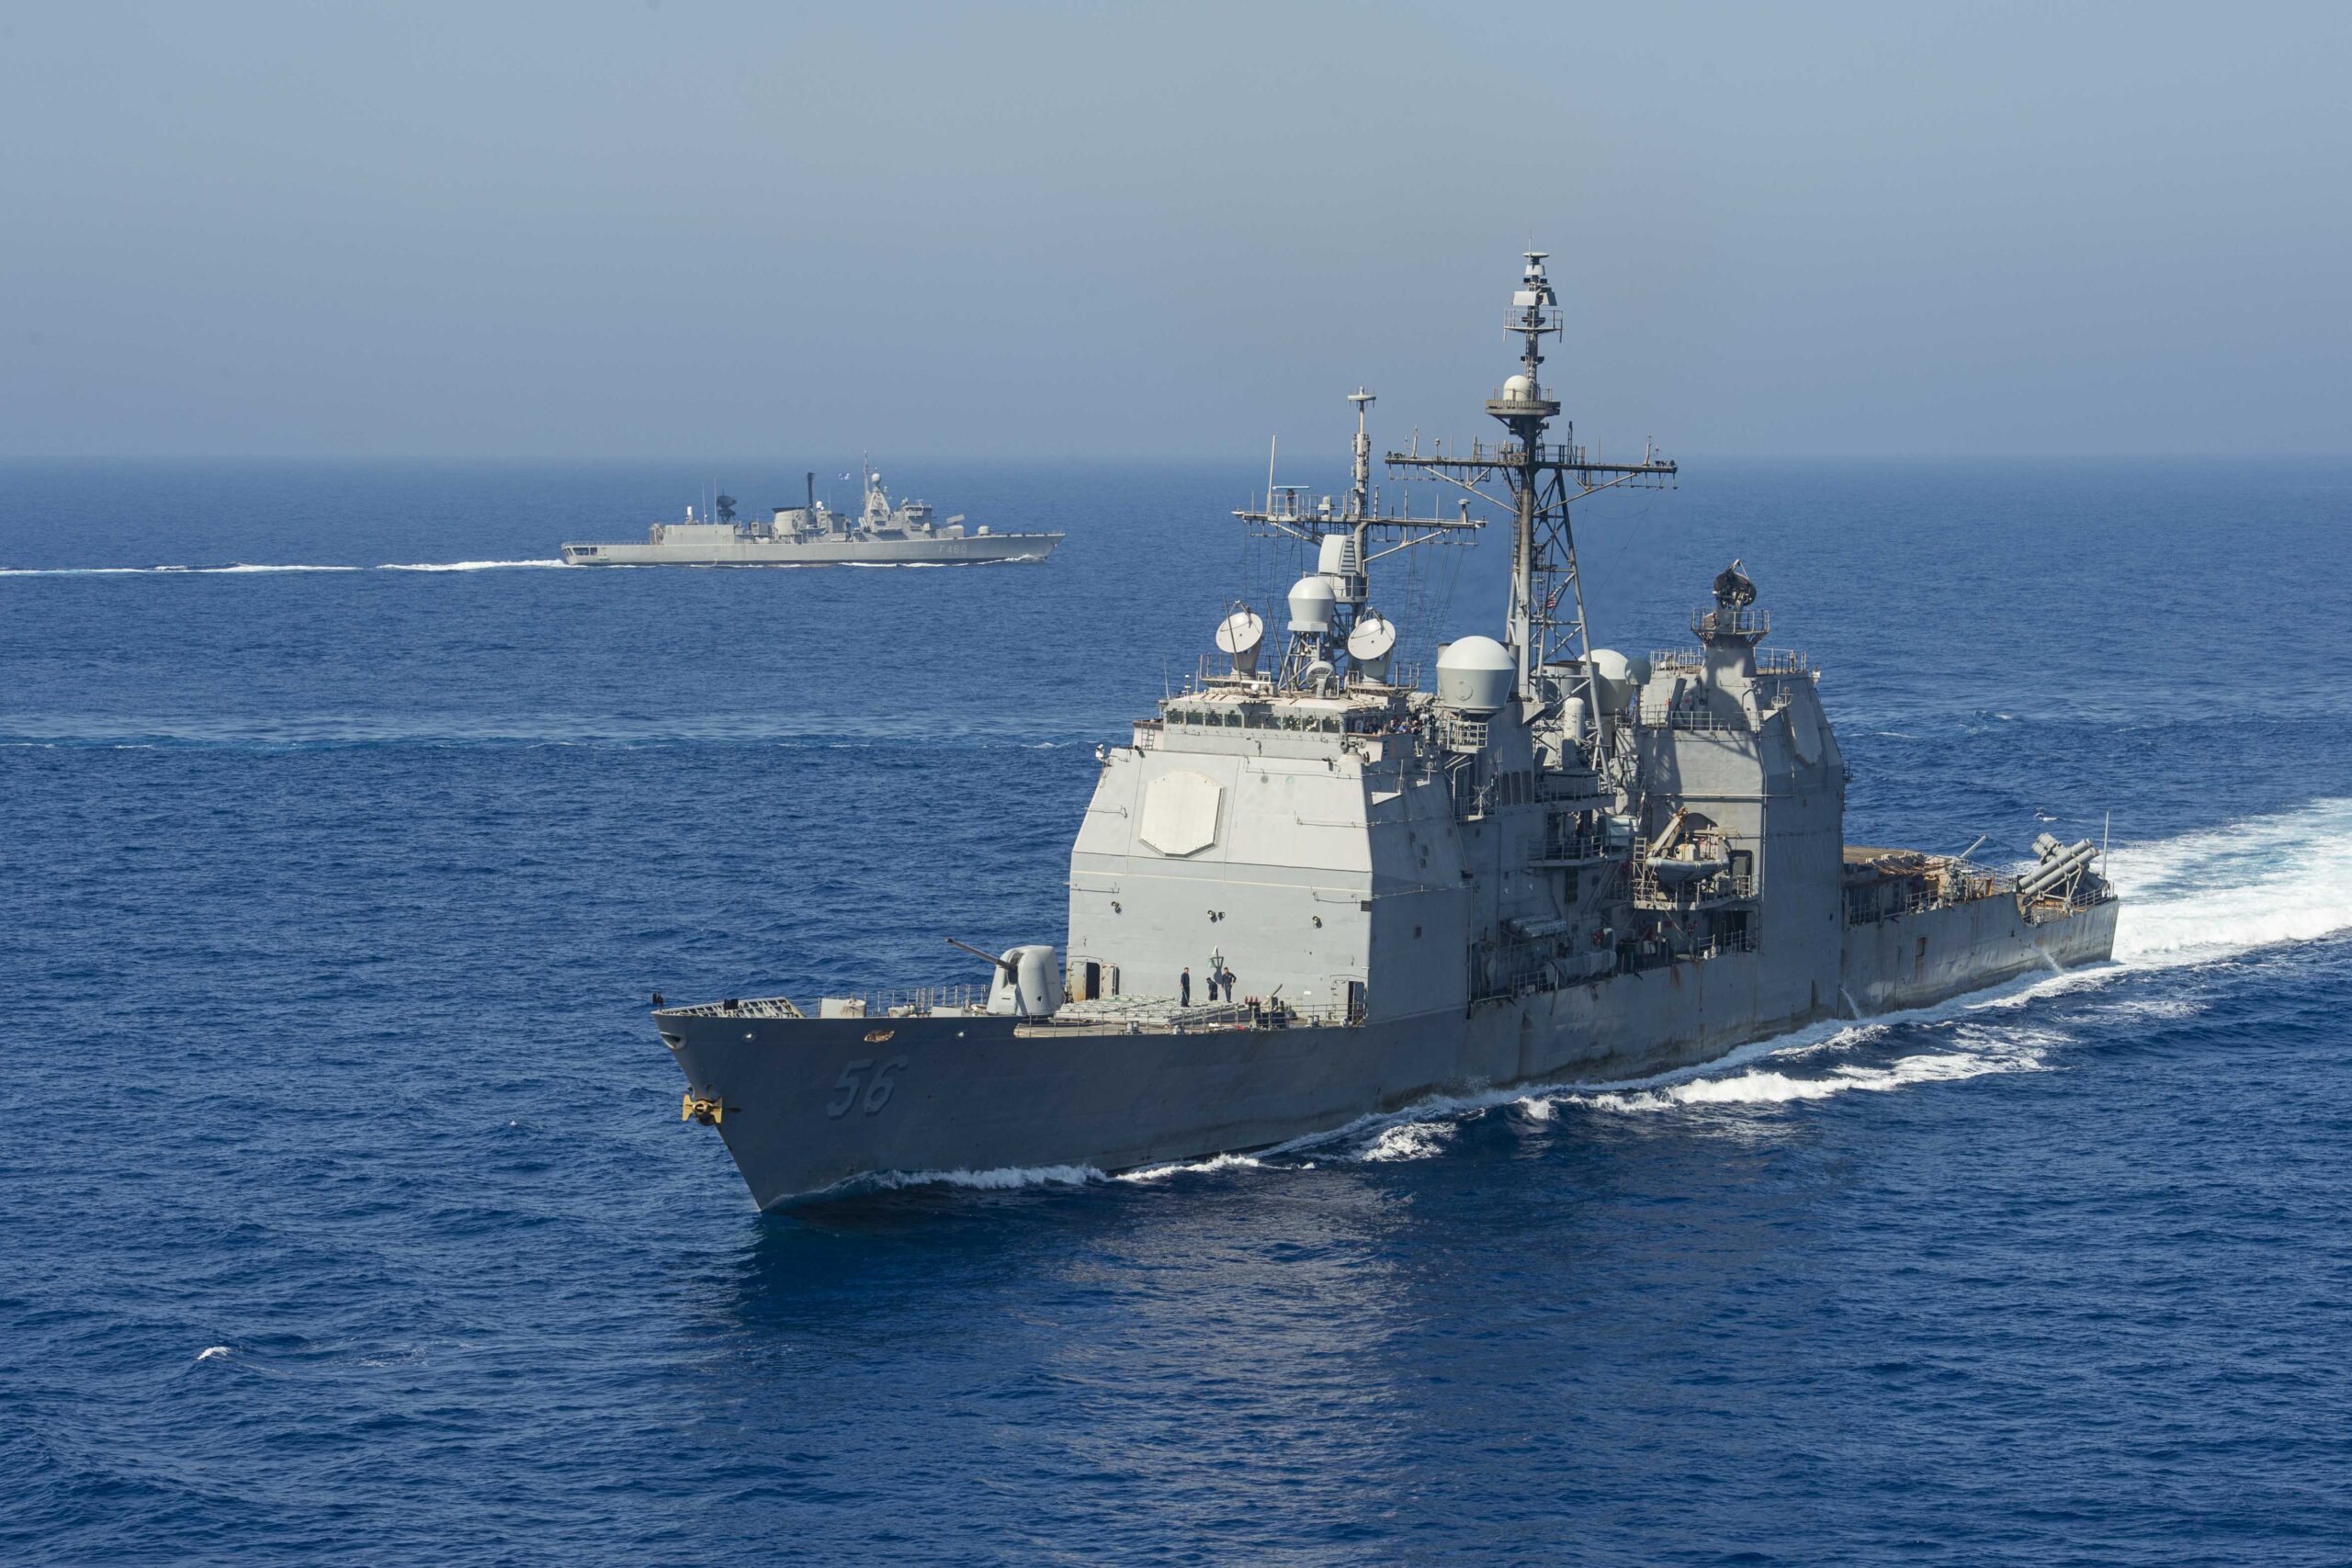 Once again, the US Navy looks to scrap its largest combatants to